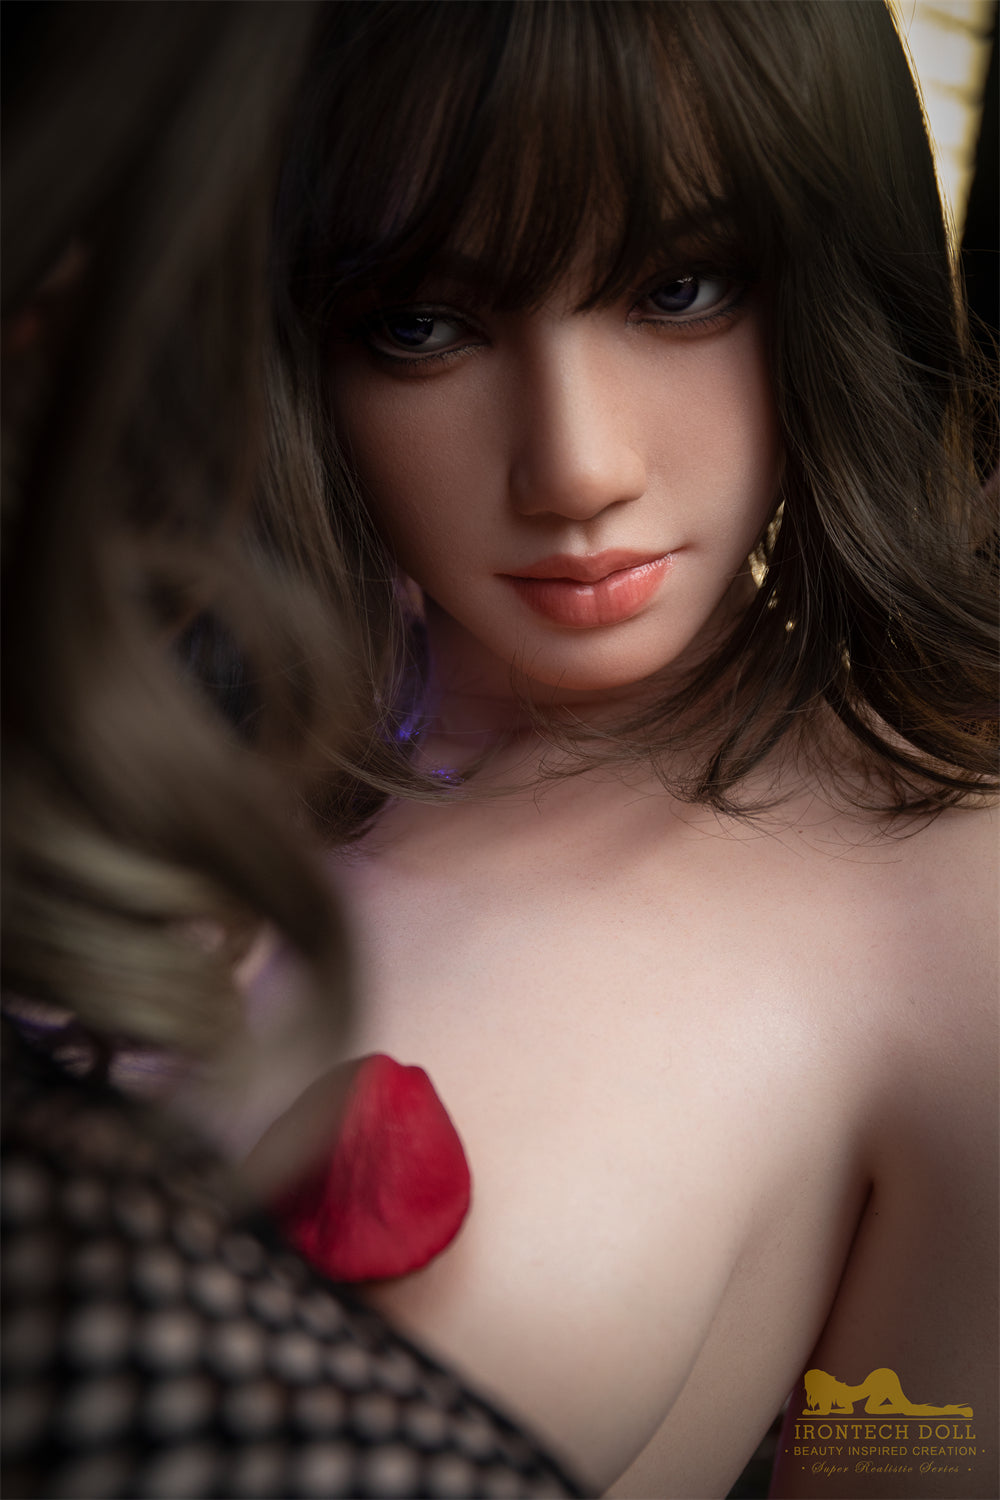 Irontech - Silicone Real Love Doll - 5ft 5in (164cm) - Amelia - Love Dolls 4U